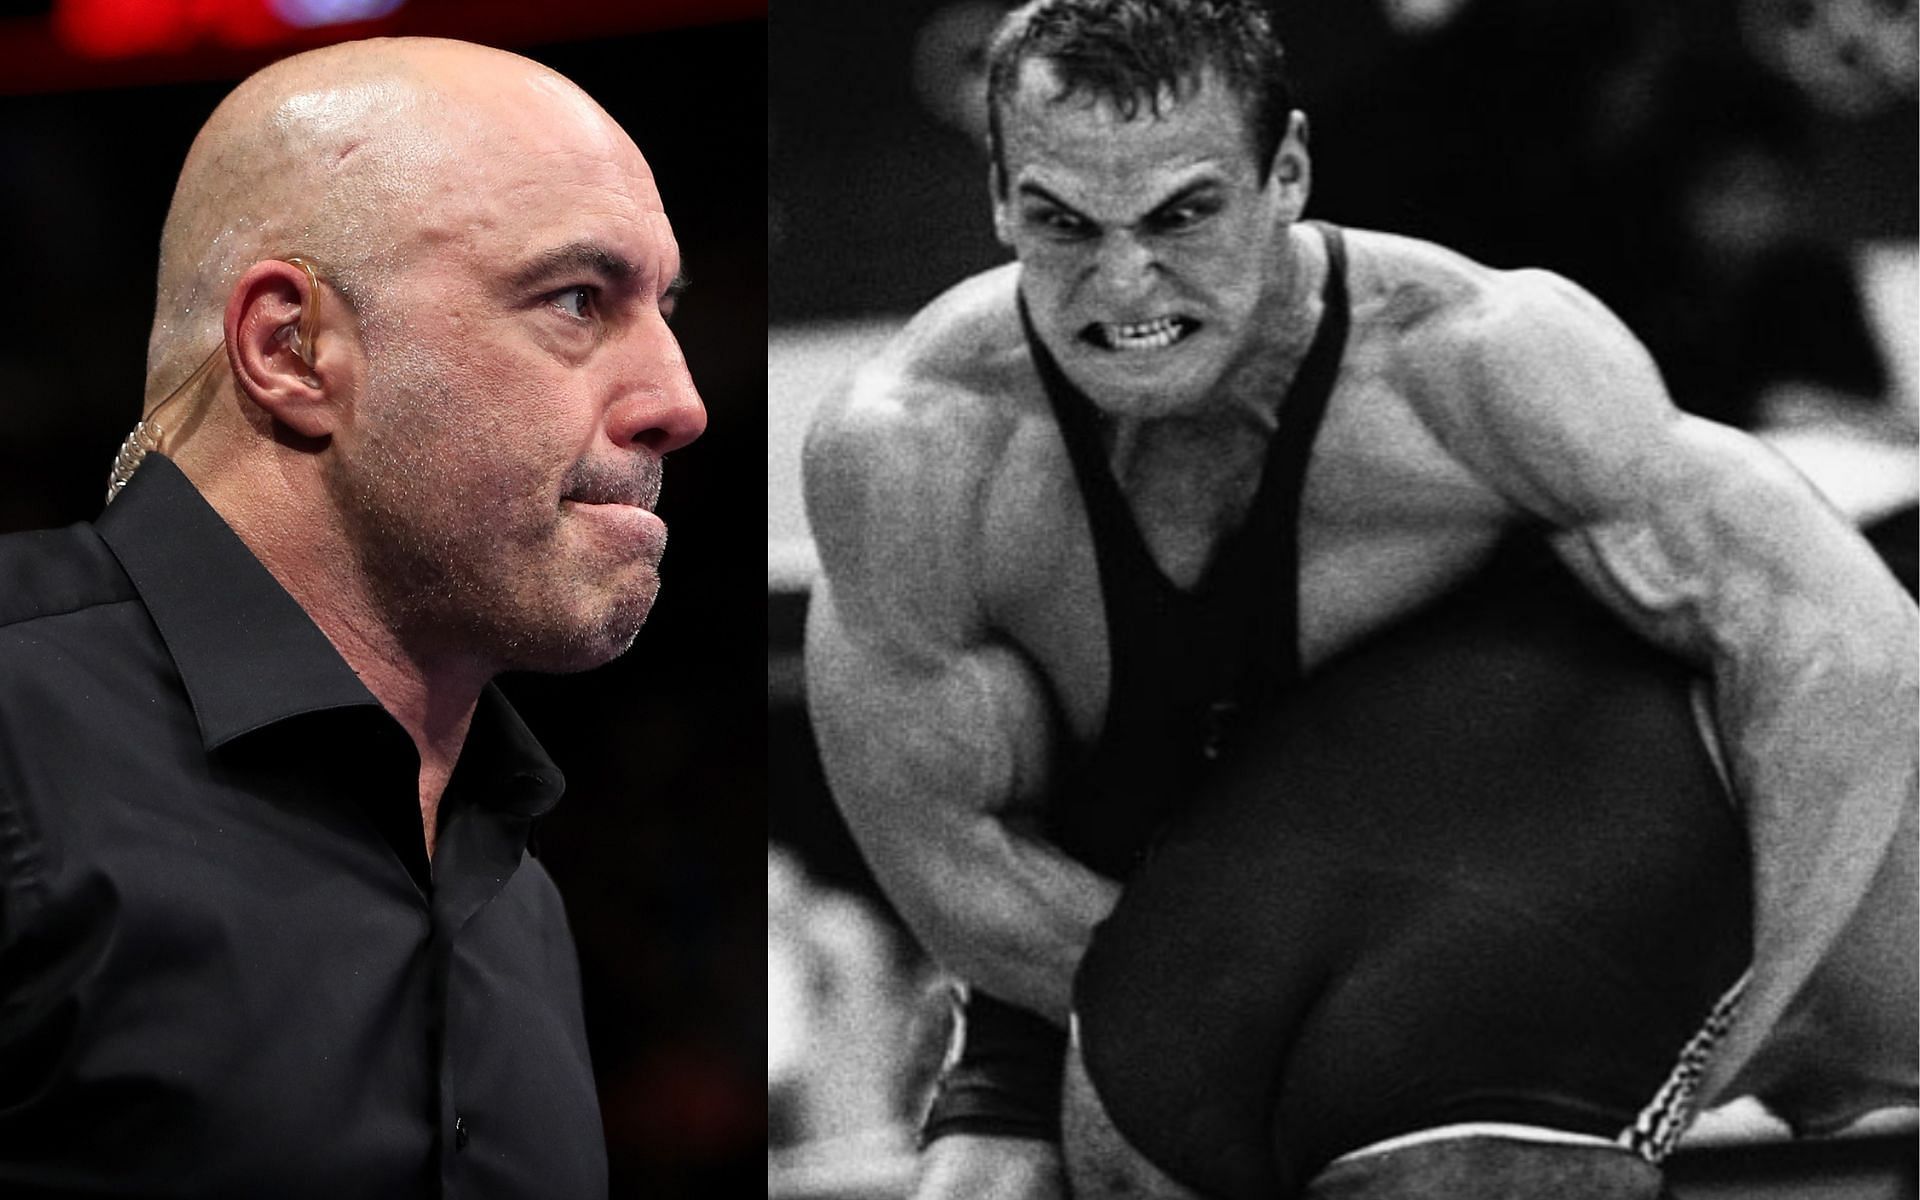 Joe Rogan (left) and Aleksandr Karelin (right). [Images courtesy: left image from Getty Images and right image from Instagram @joerogan]